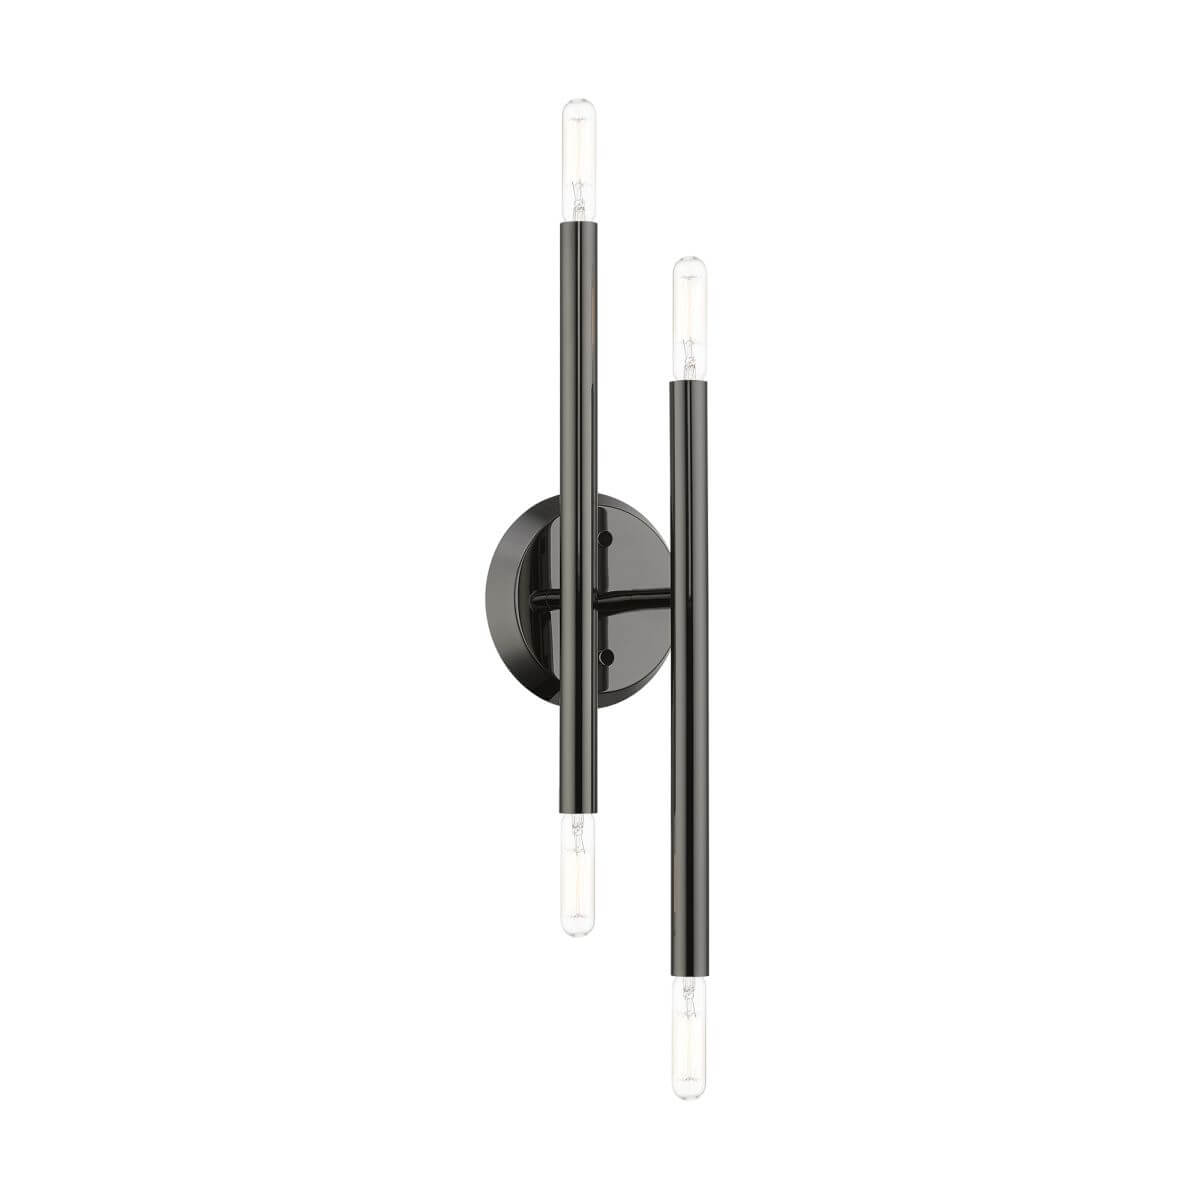 4 Light 17 inch Tall Wall Sconce in Black Chrome - 245303